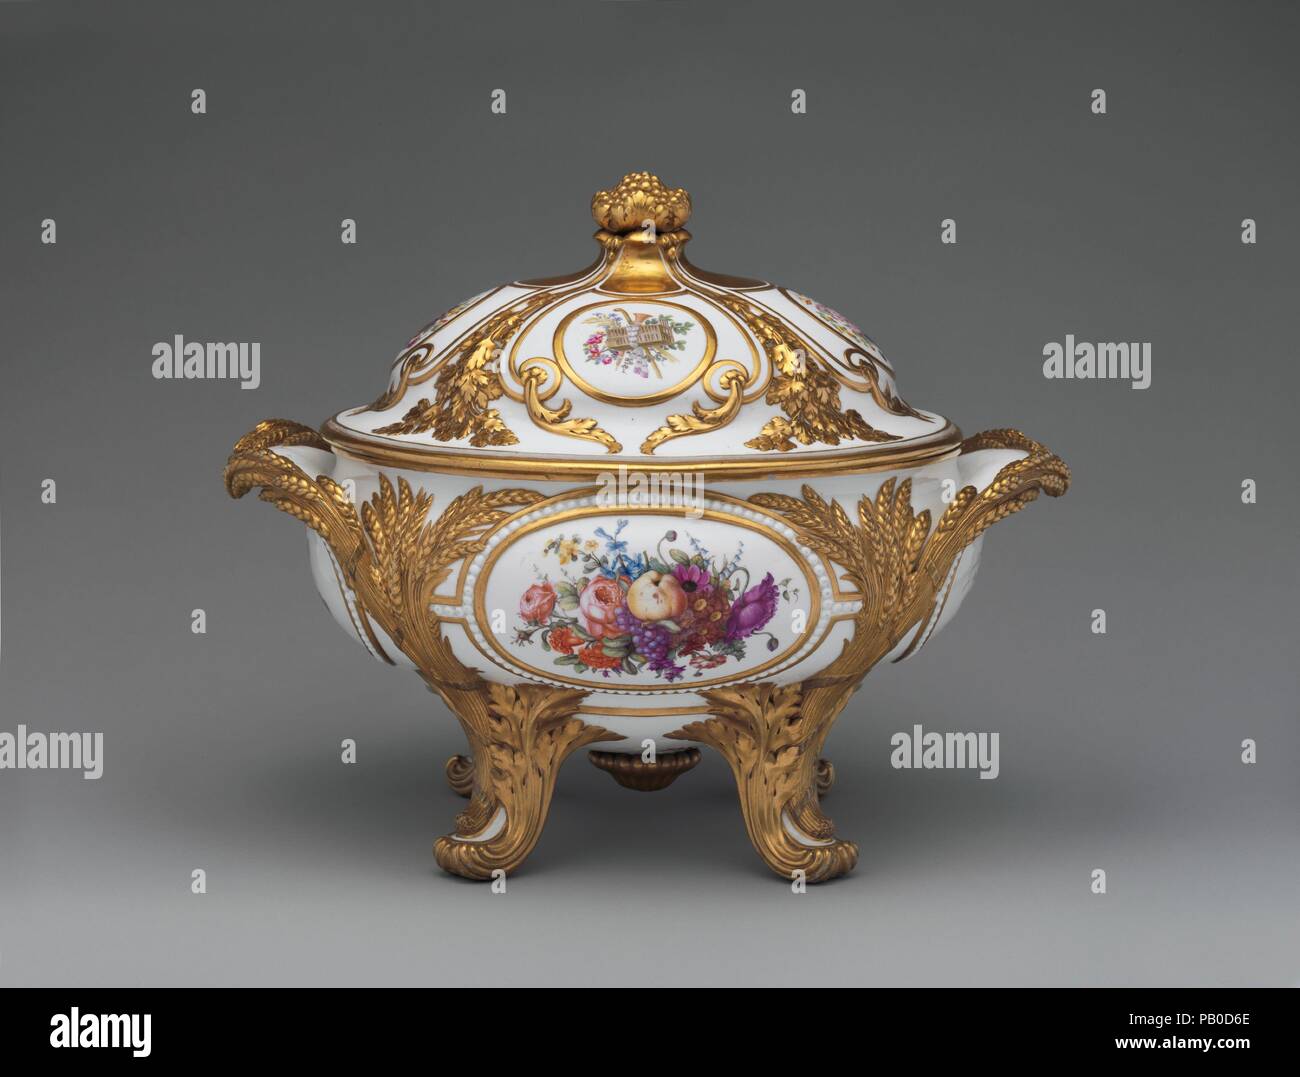 Tureen with cover. Culture: French, Sèvres. Decorator: François Antoine Pfeiffer (French, active 1771-1800); Nicolas Sinsson (French, active 1773-1795); Gilded by Henri-François Vincent (active 1753-1806). Dimensions: Overall (confirmed): 13 1/16 × 16 3/8 × 11 5/8 in. (33.2 × 41.6 × 29.5 cm). Factory: Sèvres Manufactory (French, 1740-present). Date: ca. 1777-85. Museum: Metropolitan Museum of Art, New York, USA. Stock Photo